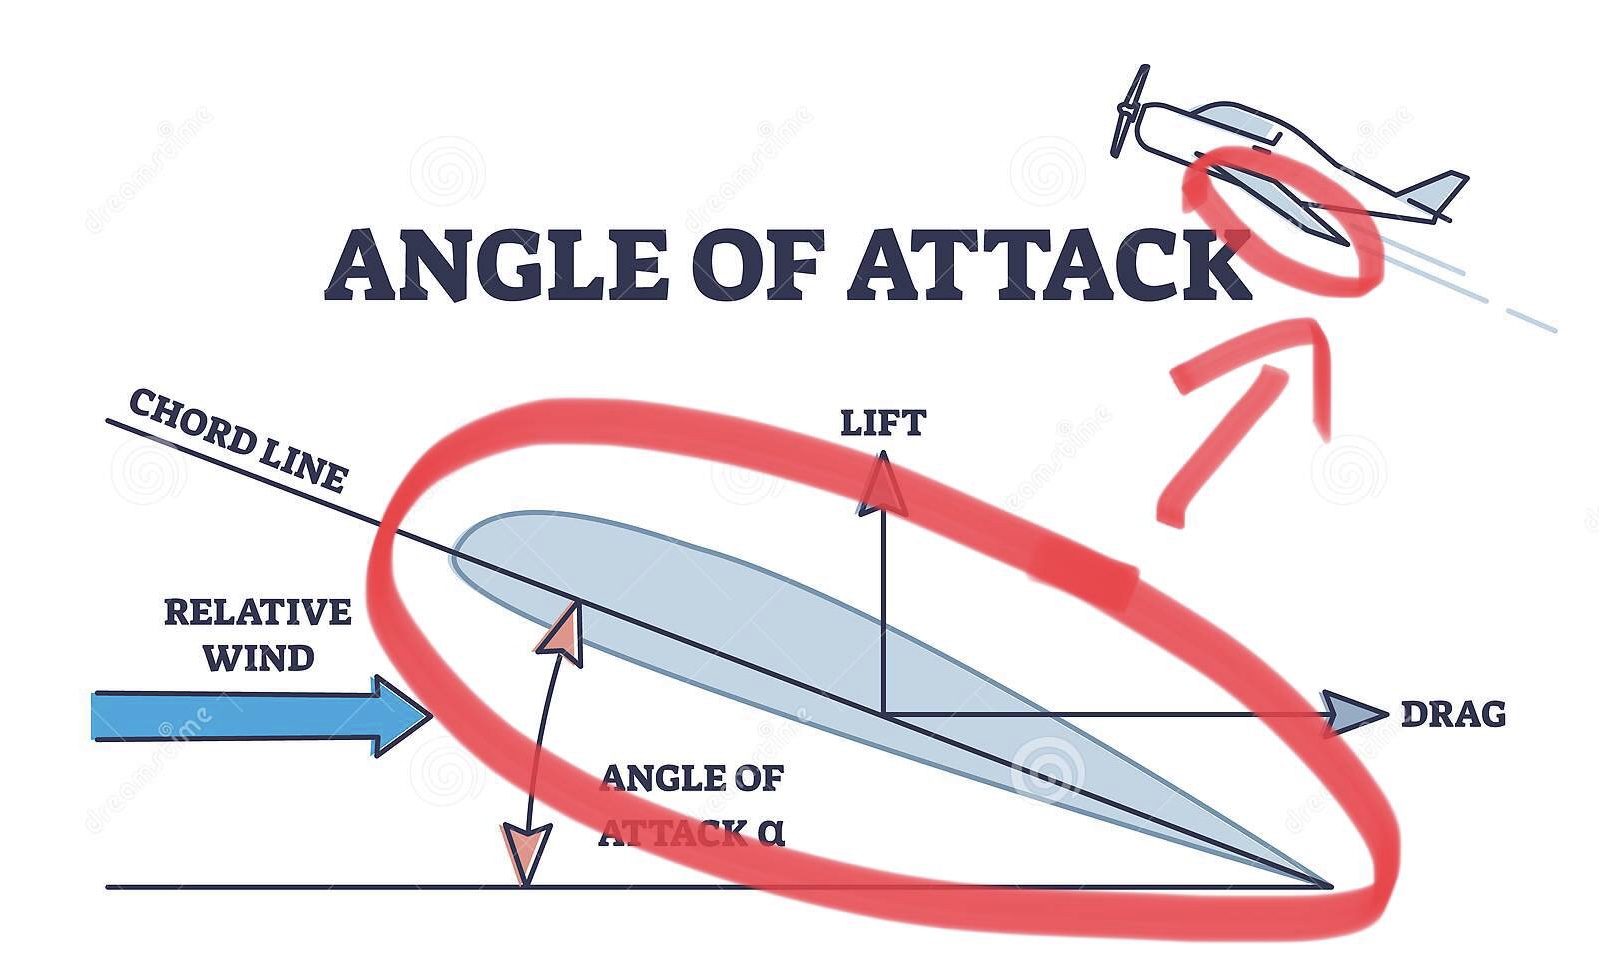 angle of attack